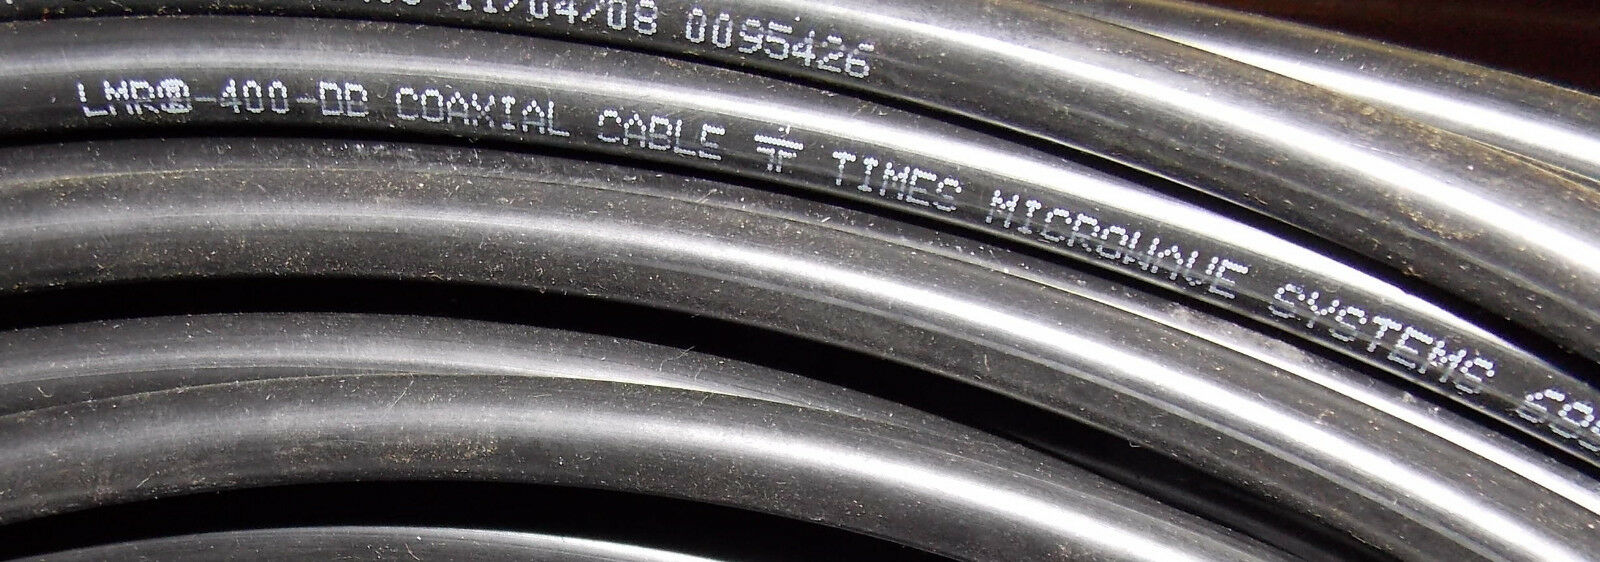 LMR400DB (Direct Burial) 100ft TIMES Microwave Antenna Coaxial Cable 68999 RG174